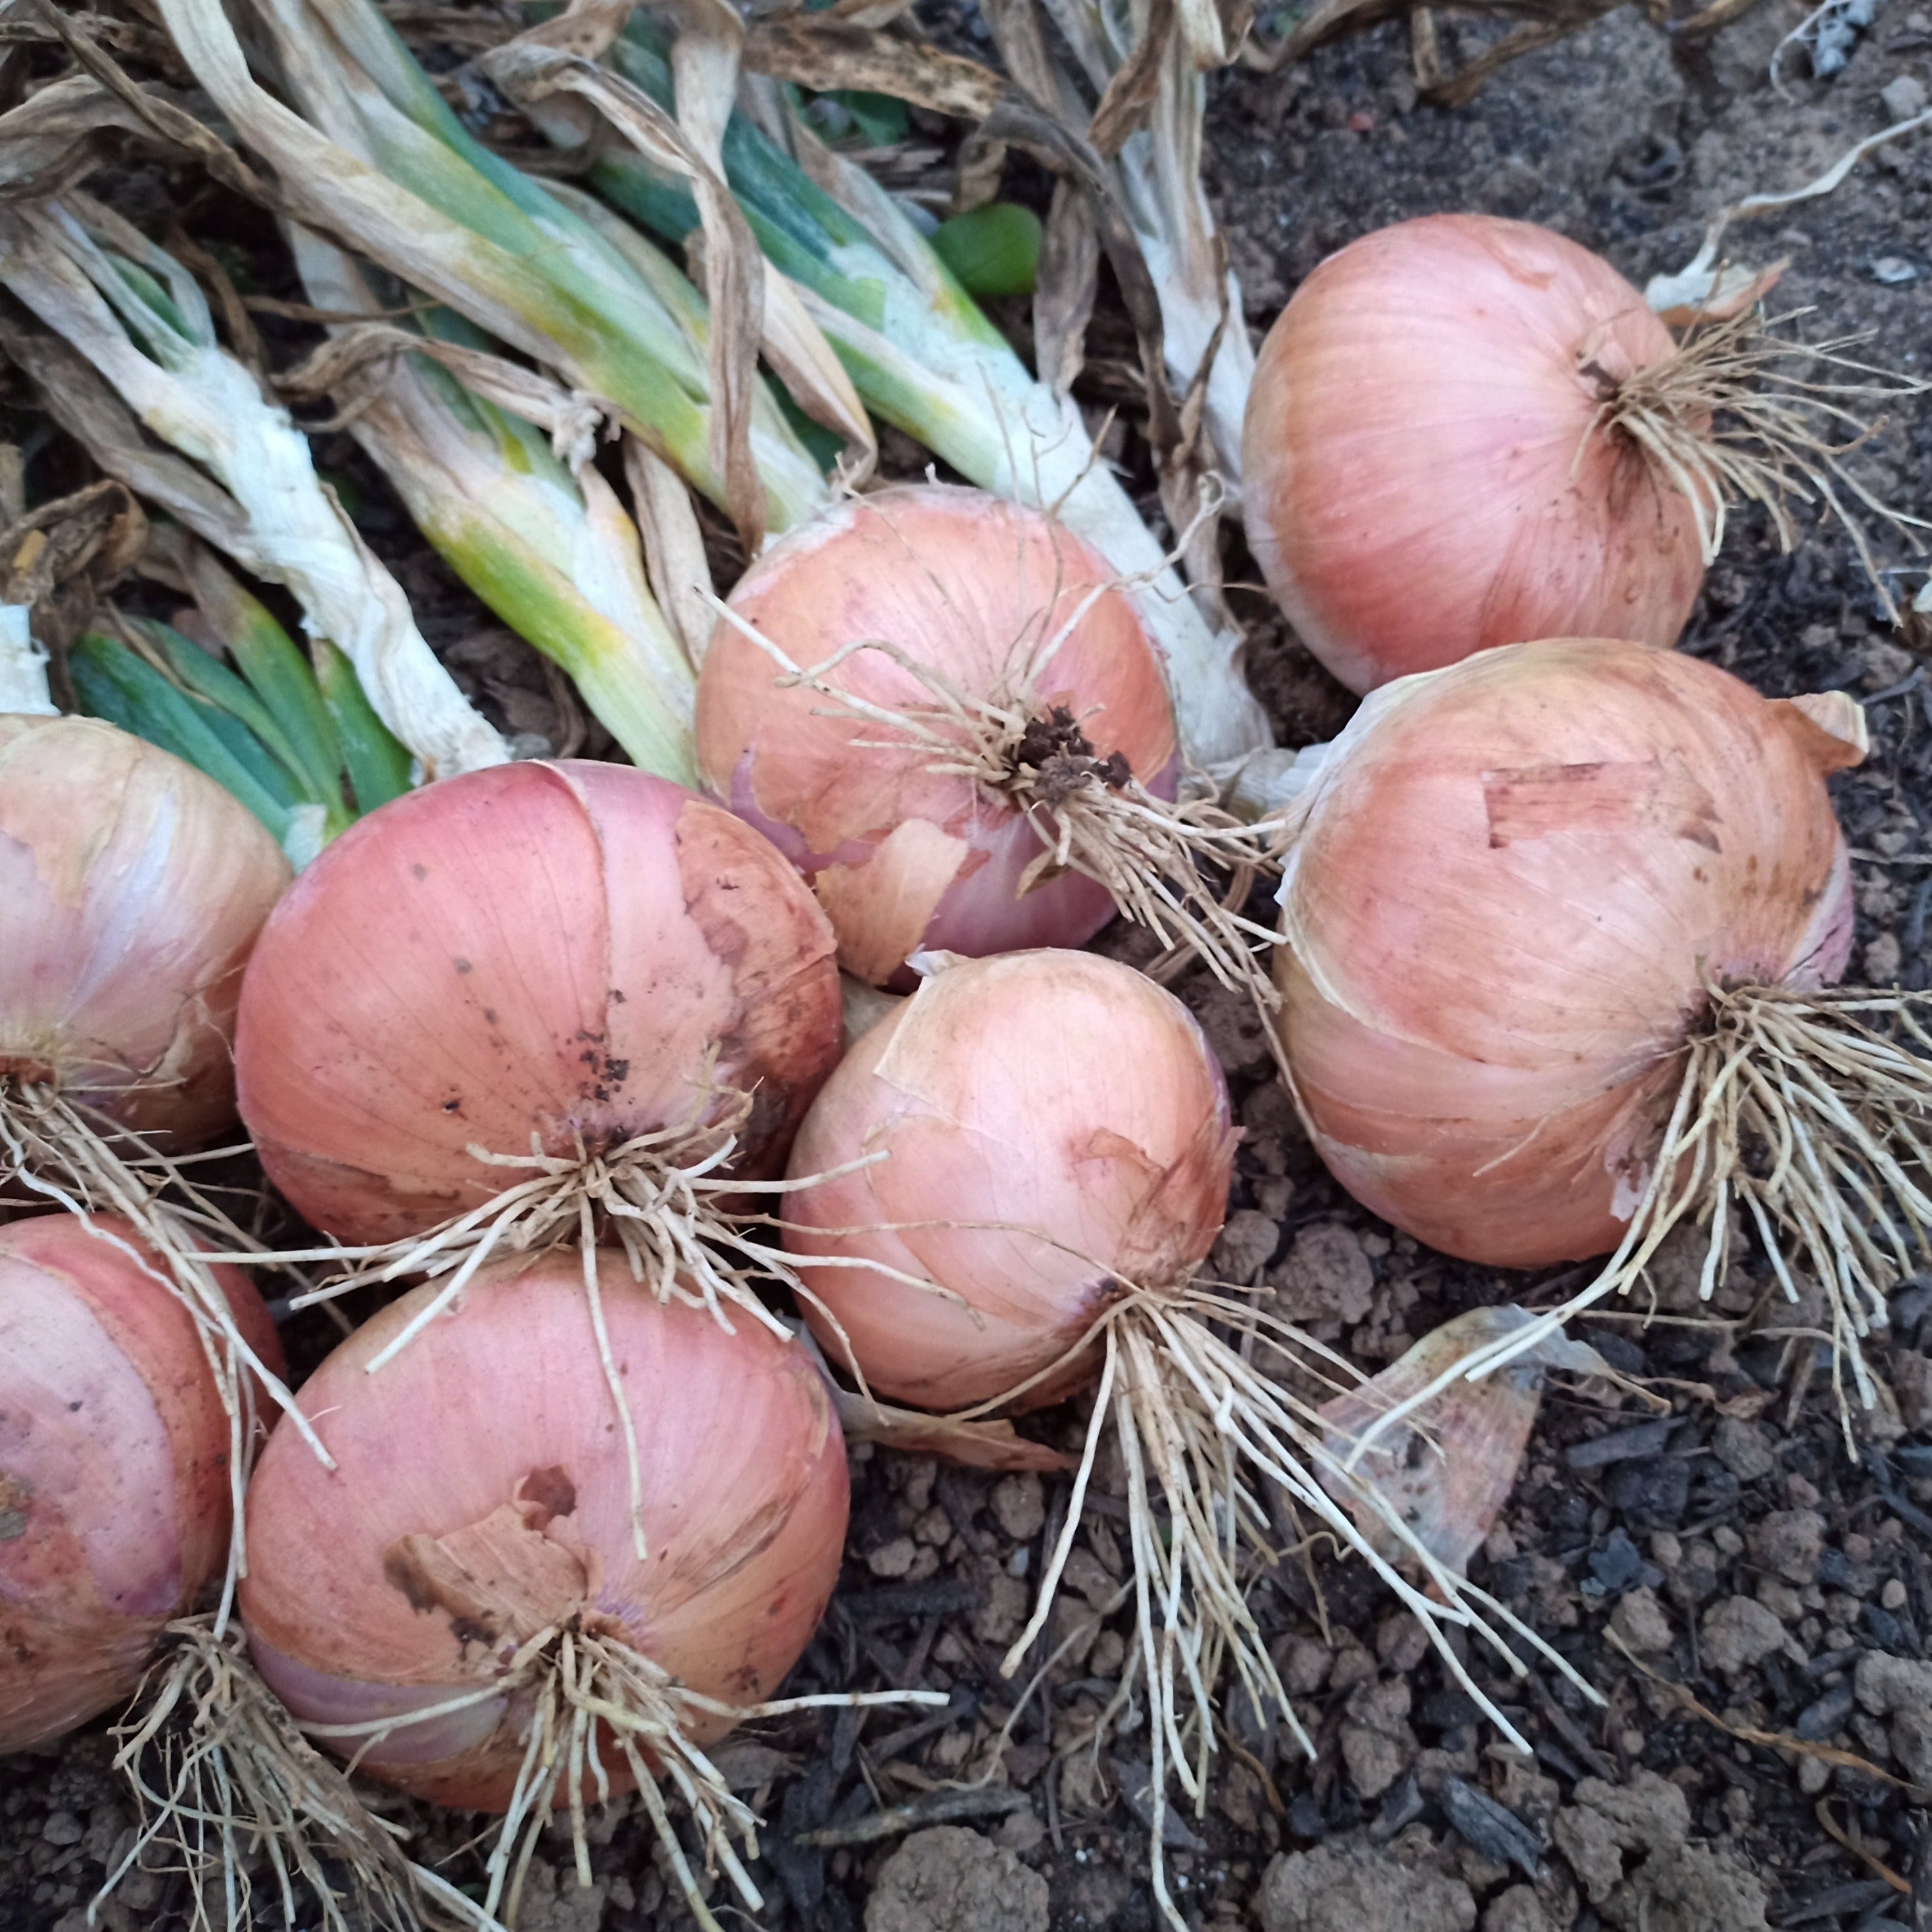 Shallot, 'Ed's Red